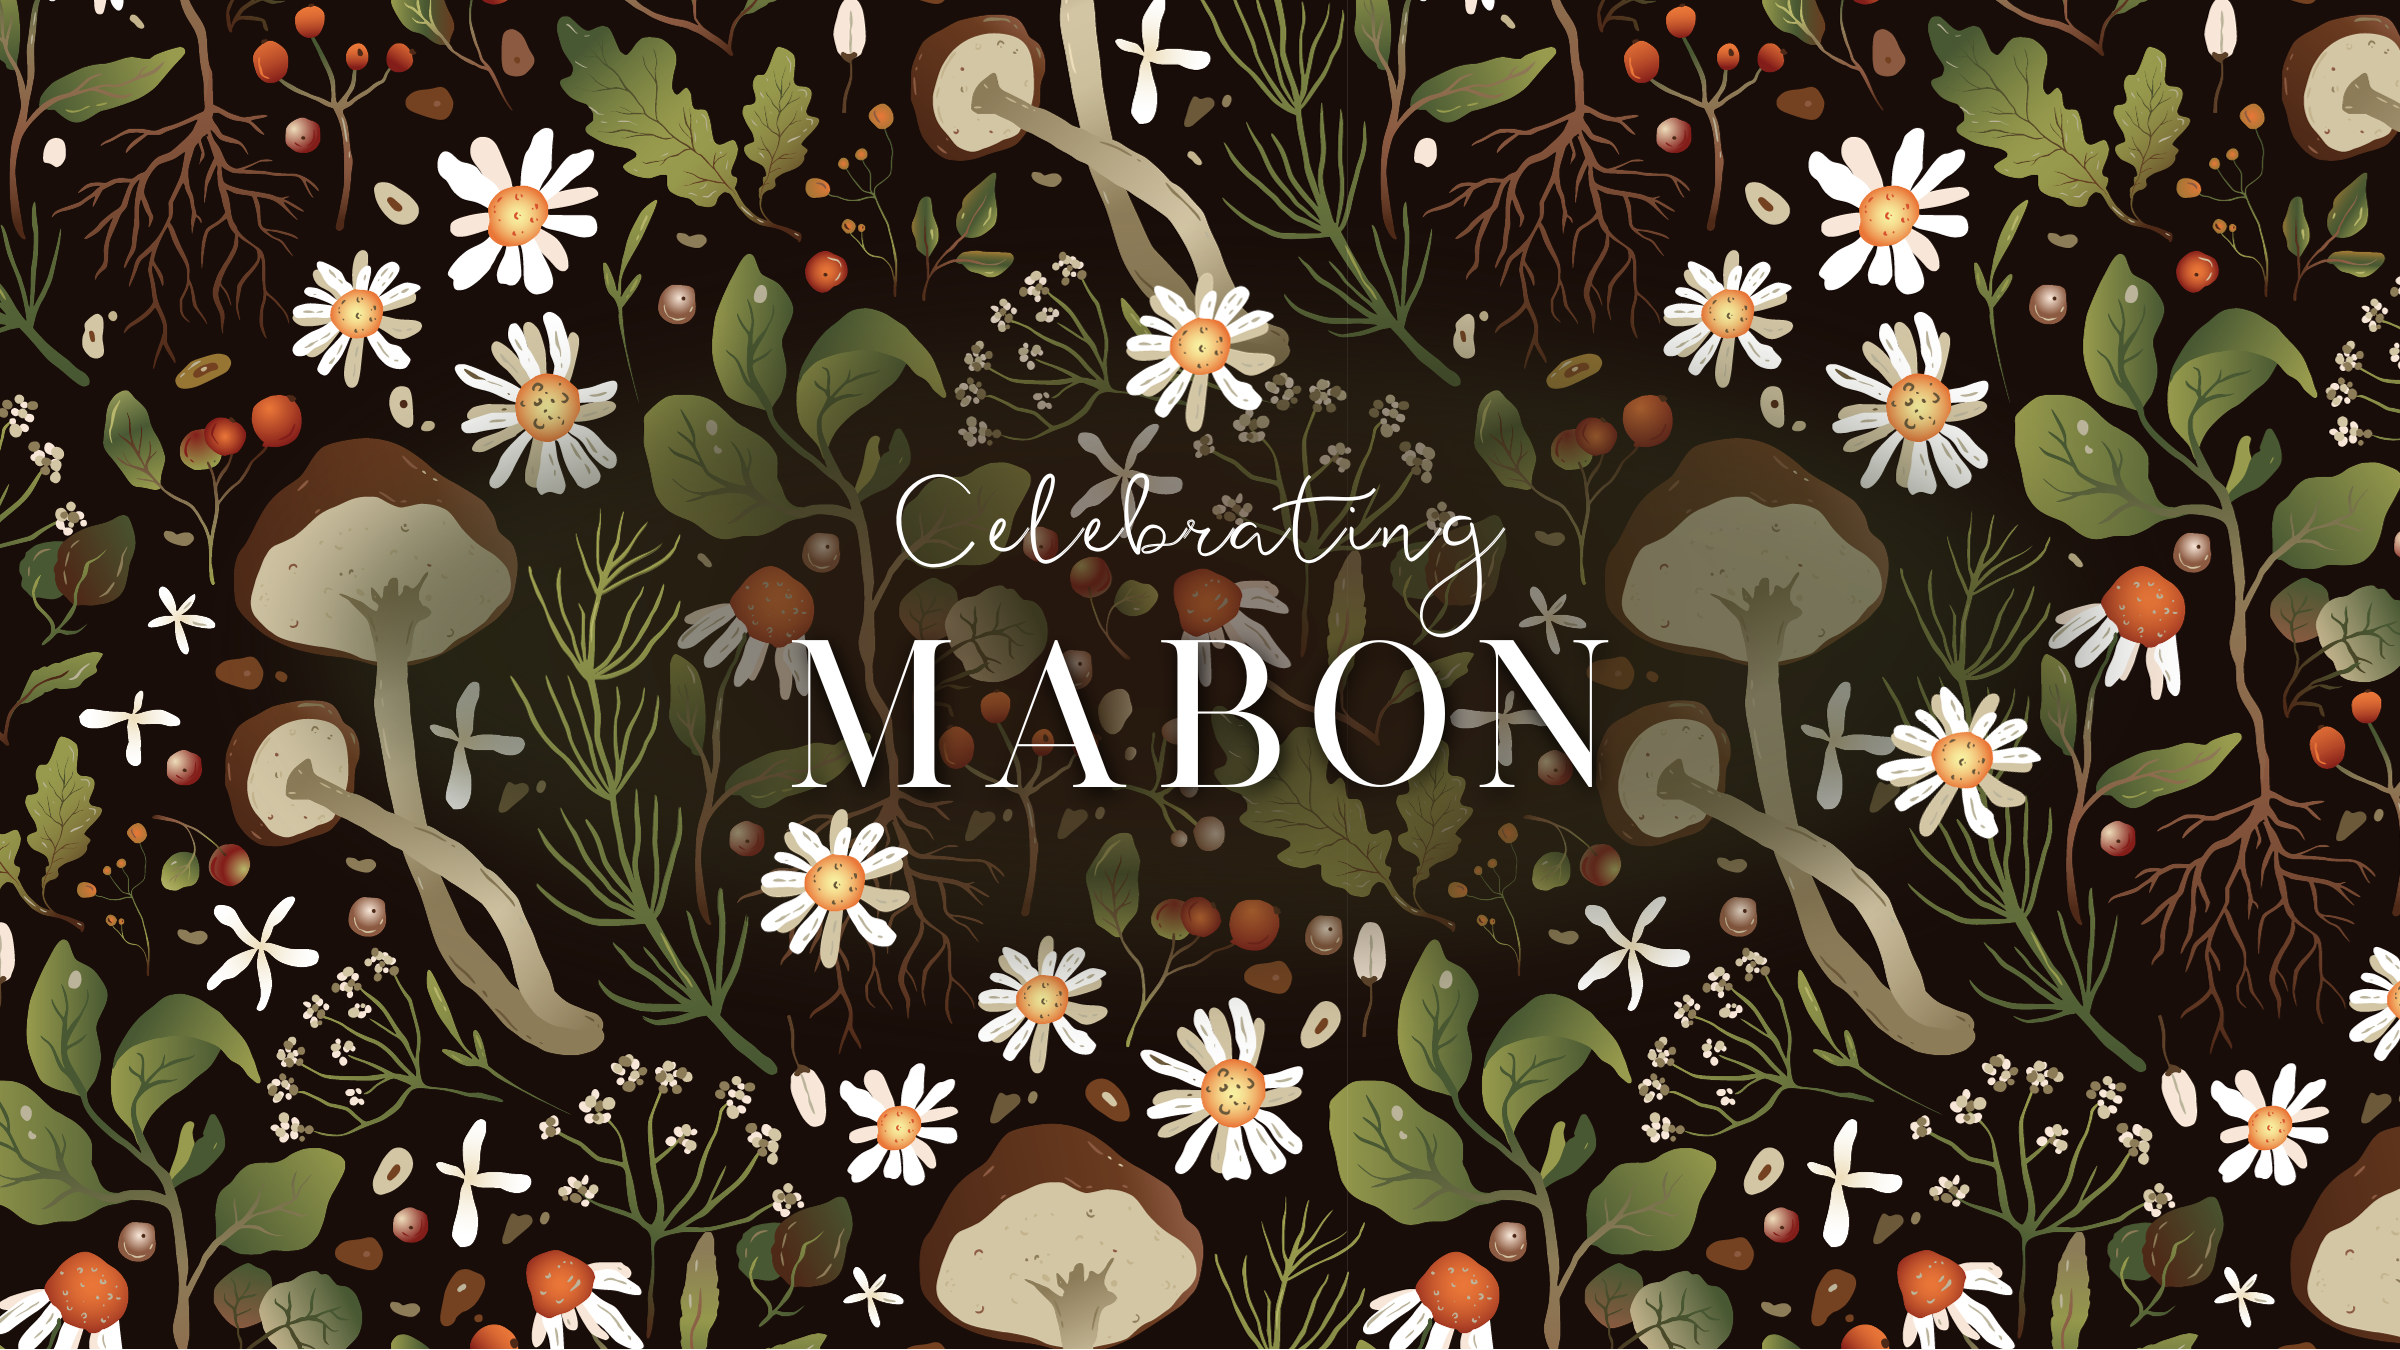 Embracing the Harvest: Celebrating Mabon and the Changing of Seasons